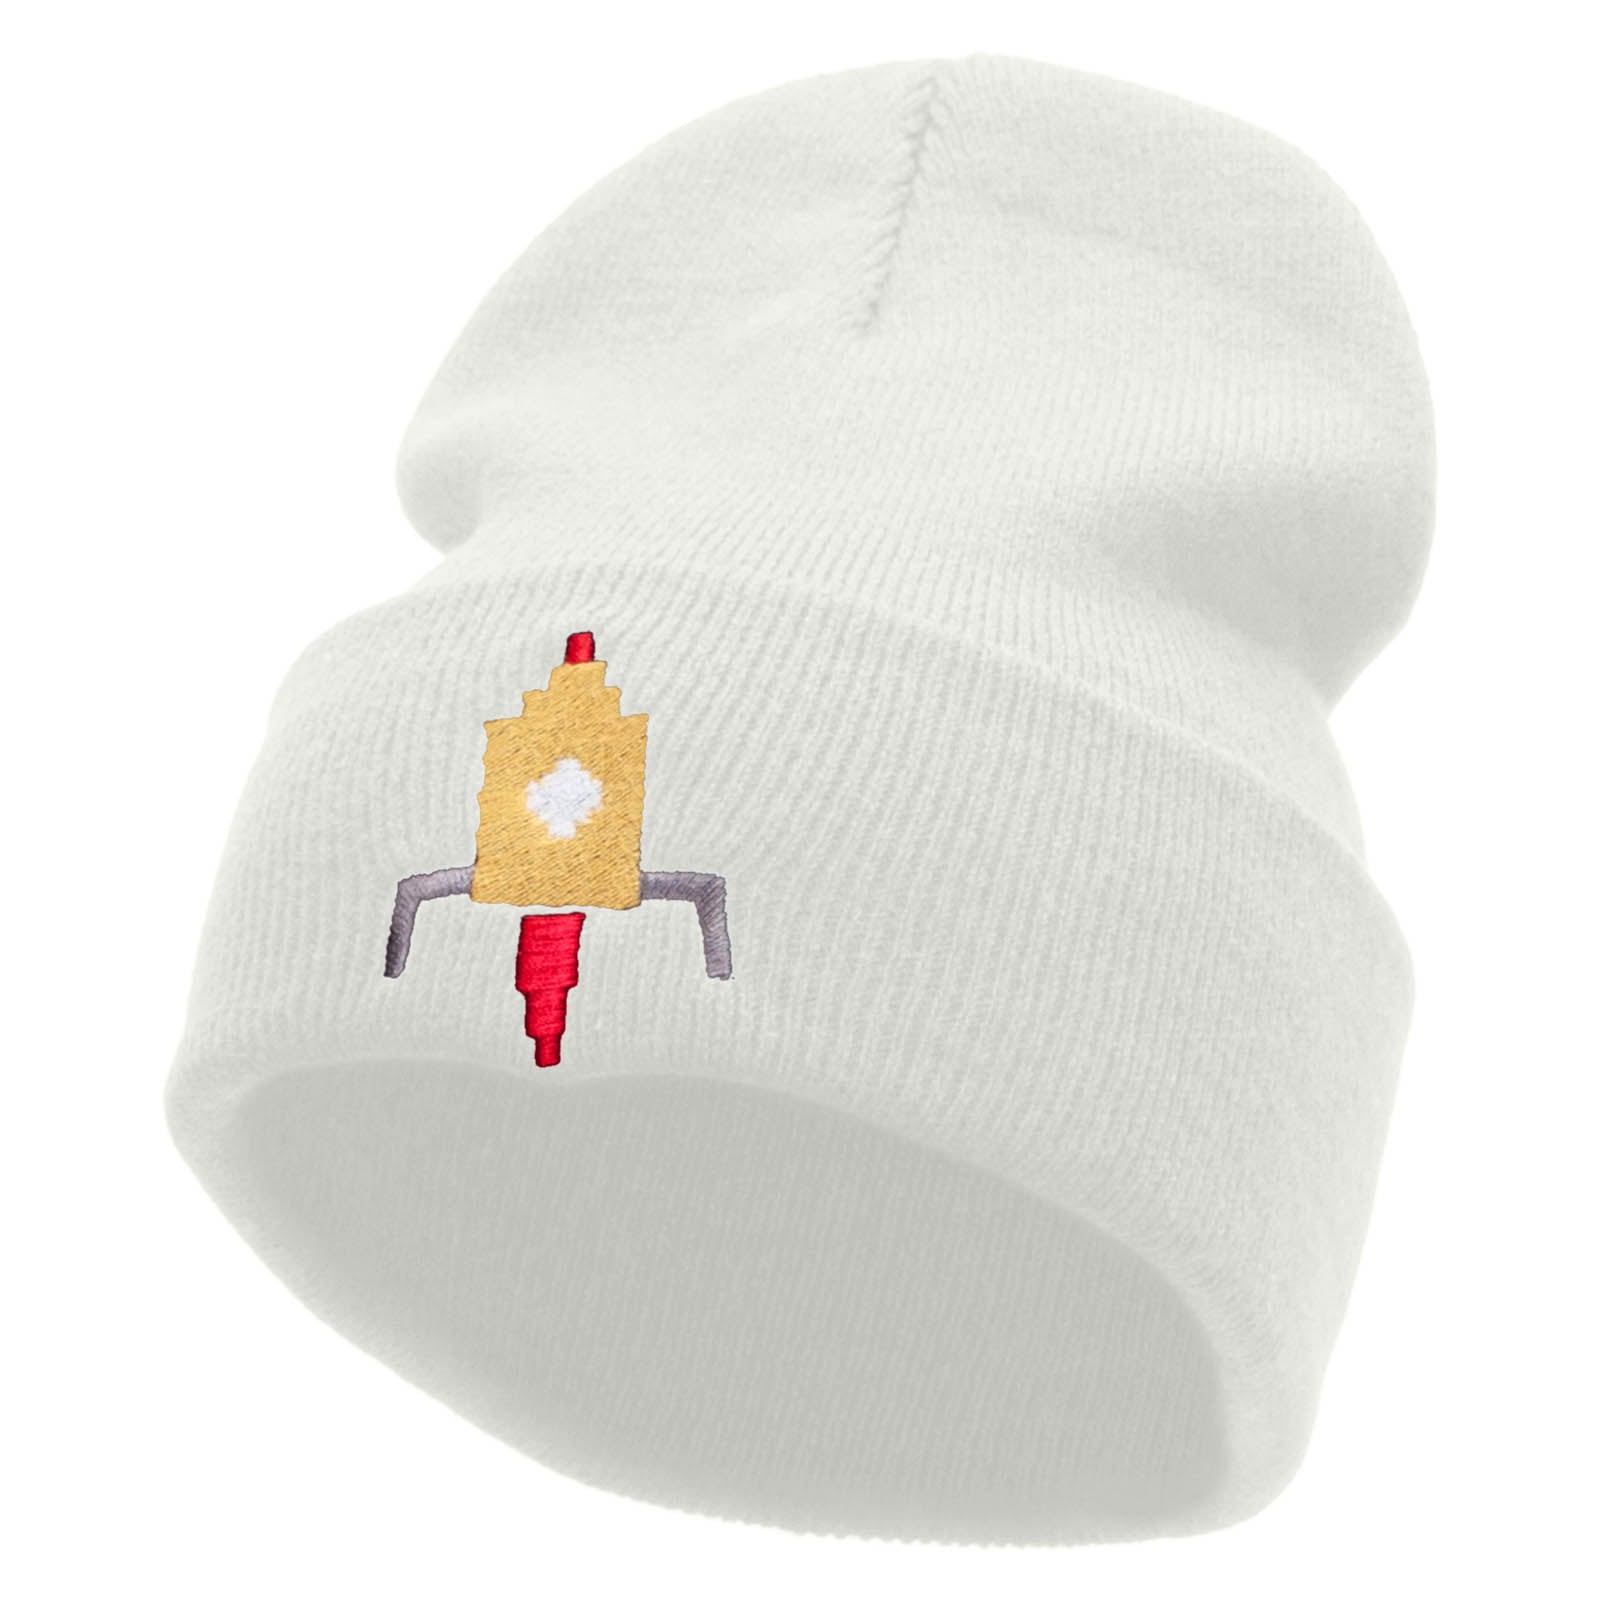 Space Ship Embroidered 12 Inch Long Knitted Beanie - White OSFM